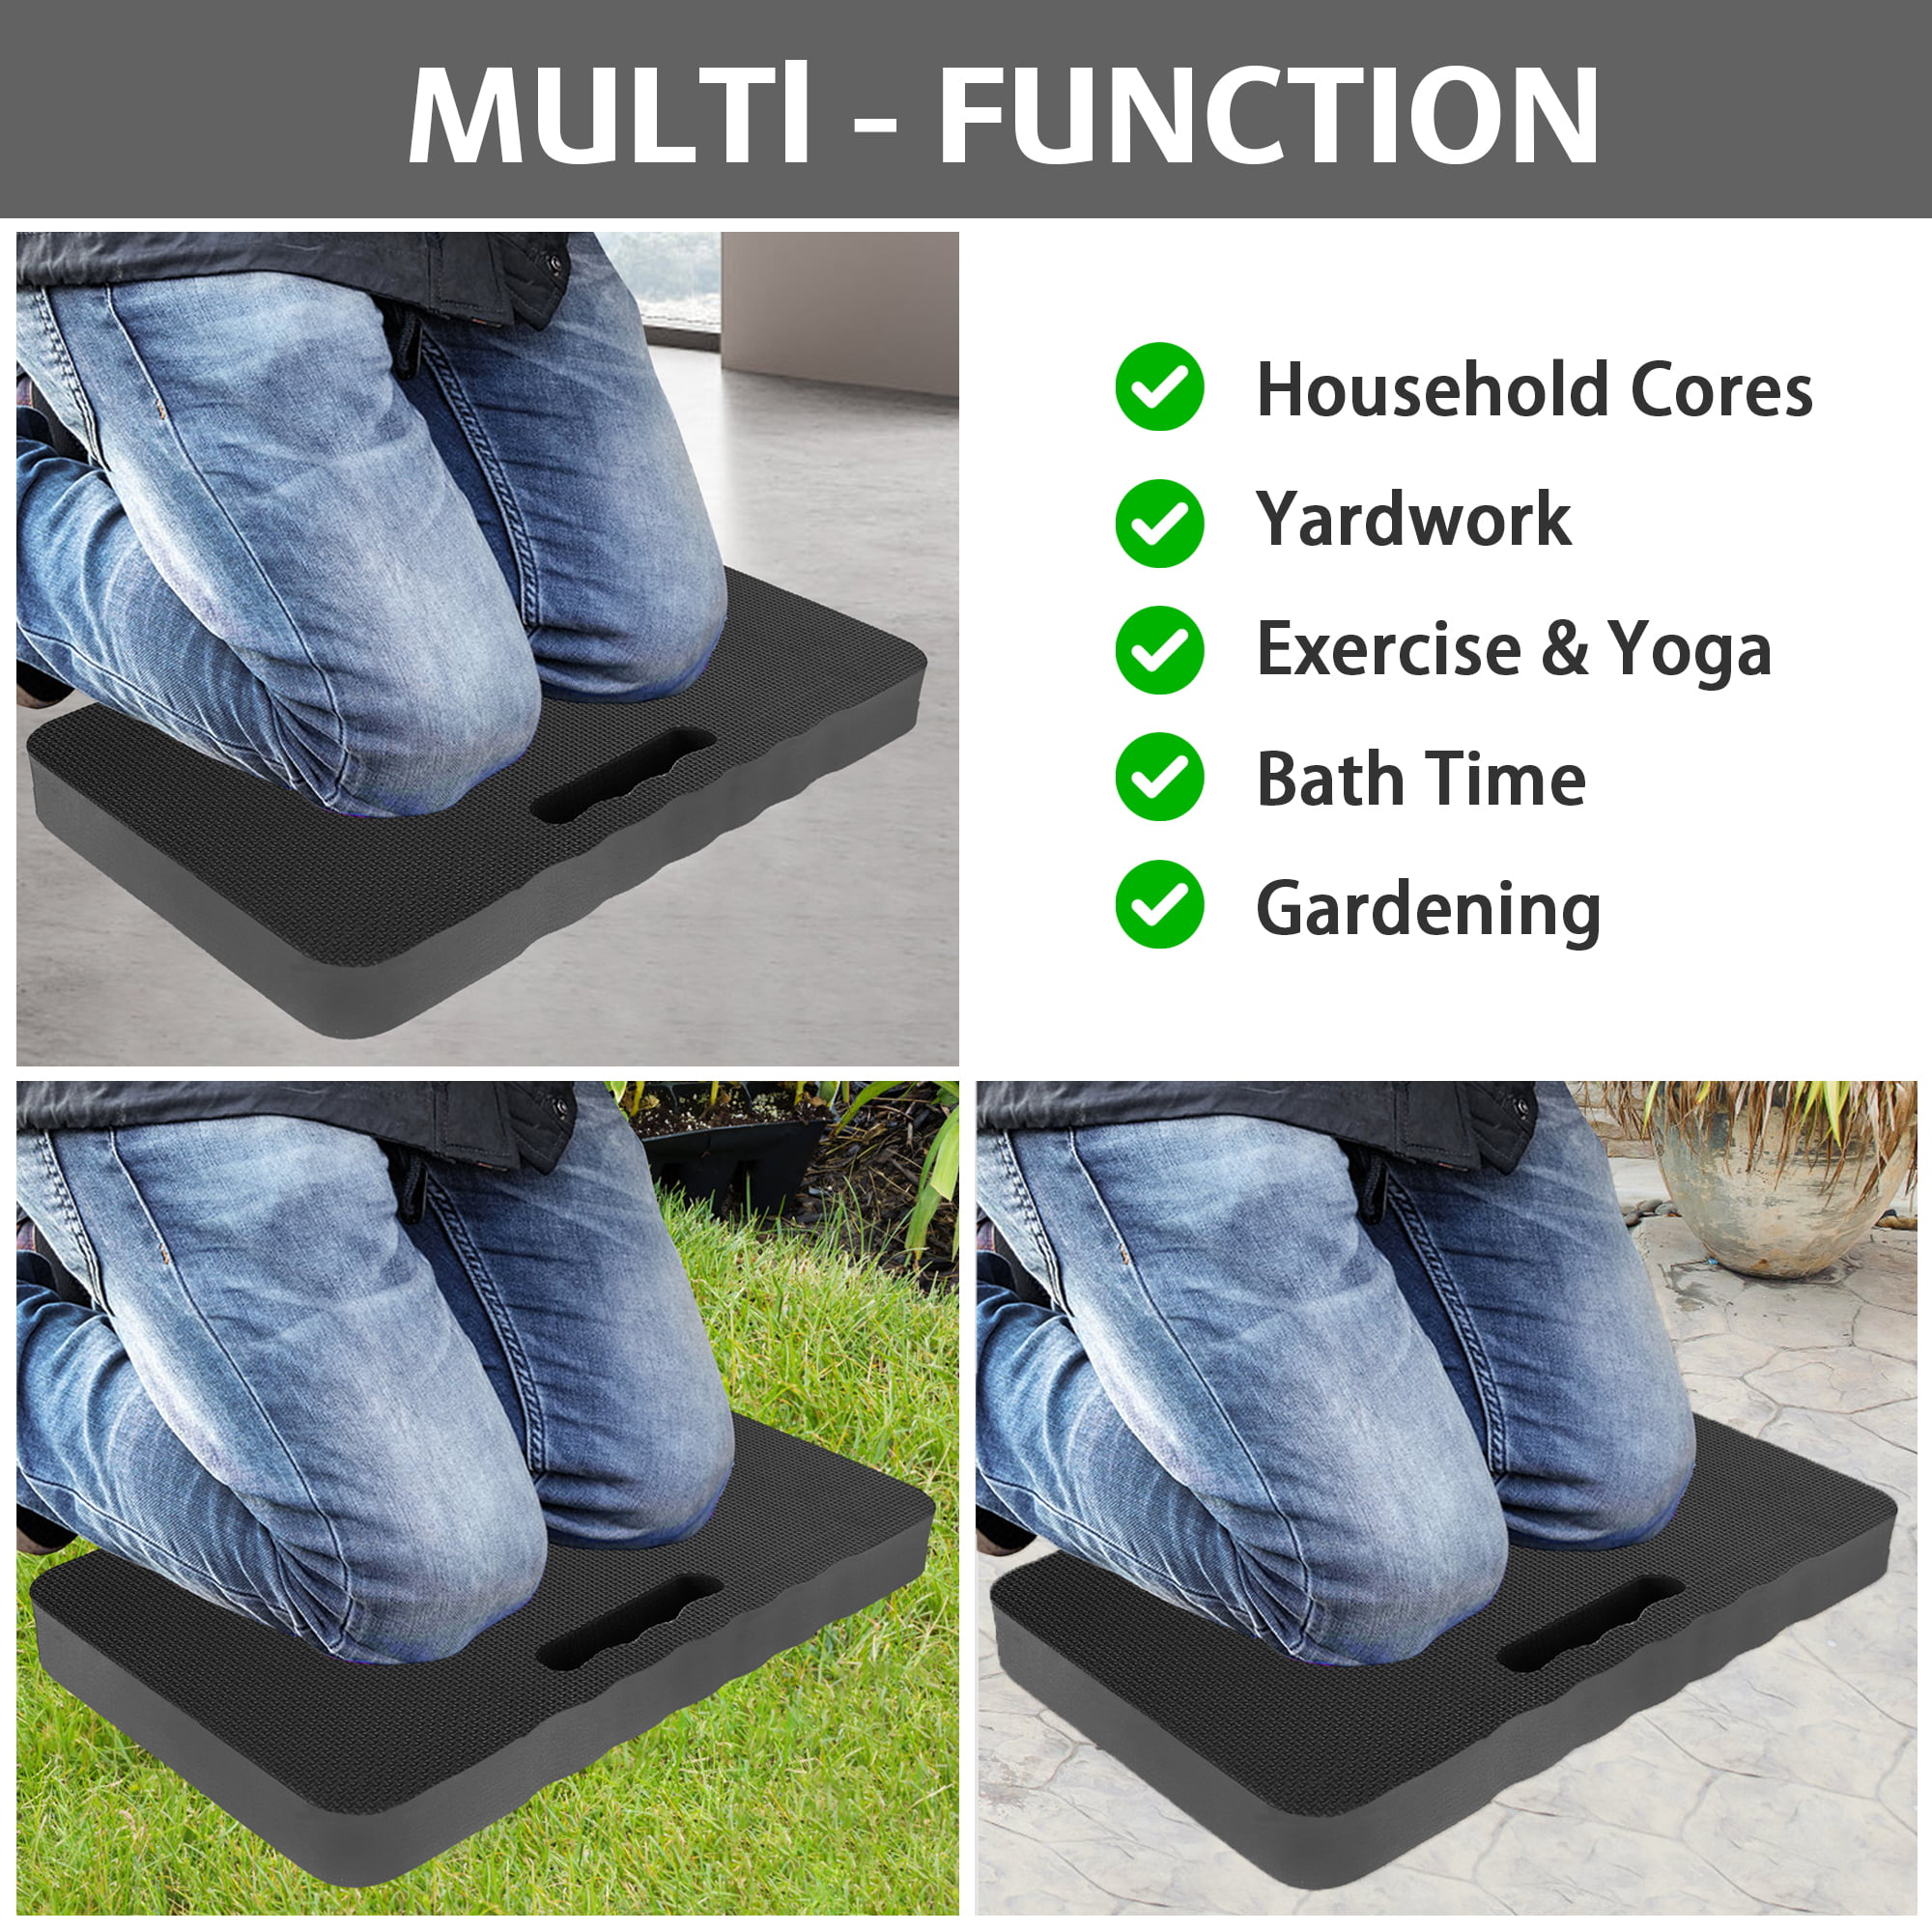 Gorilla Grip Extra Thick Kneeling Pad, Supportive Soft Foam Cushioning for Knee, Water Resistant Construction for Gardening, Bathing Baby, Workout